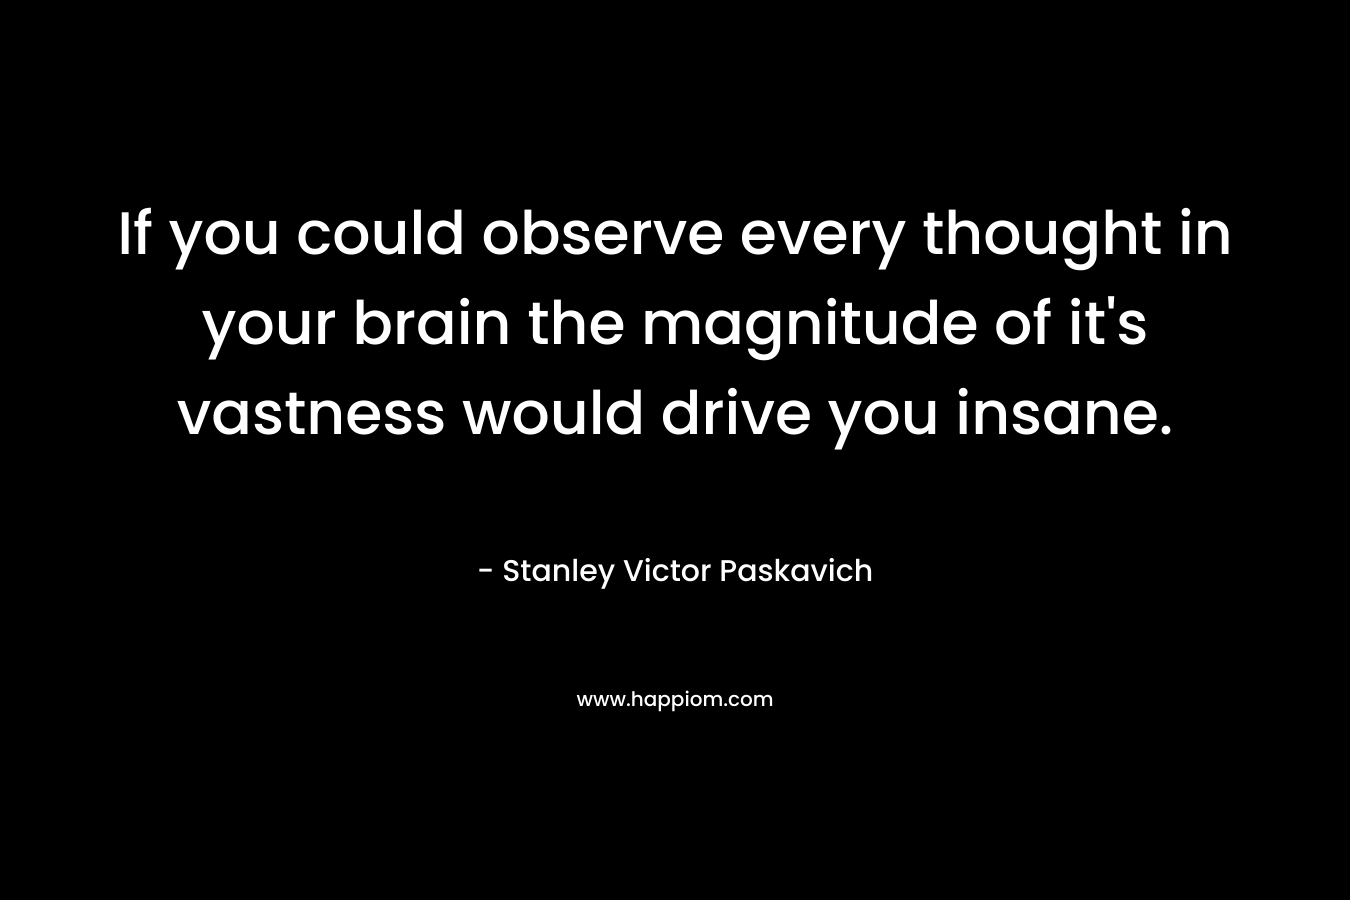 If you could observe every thought in your brain the magnitude of it’s vastness would drive you insane. – Stanley Victor Paskavich